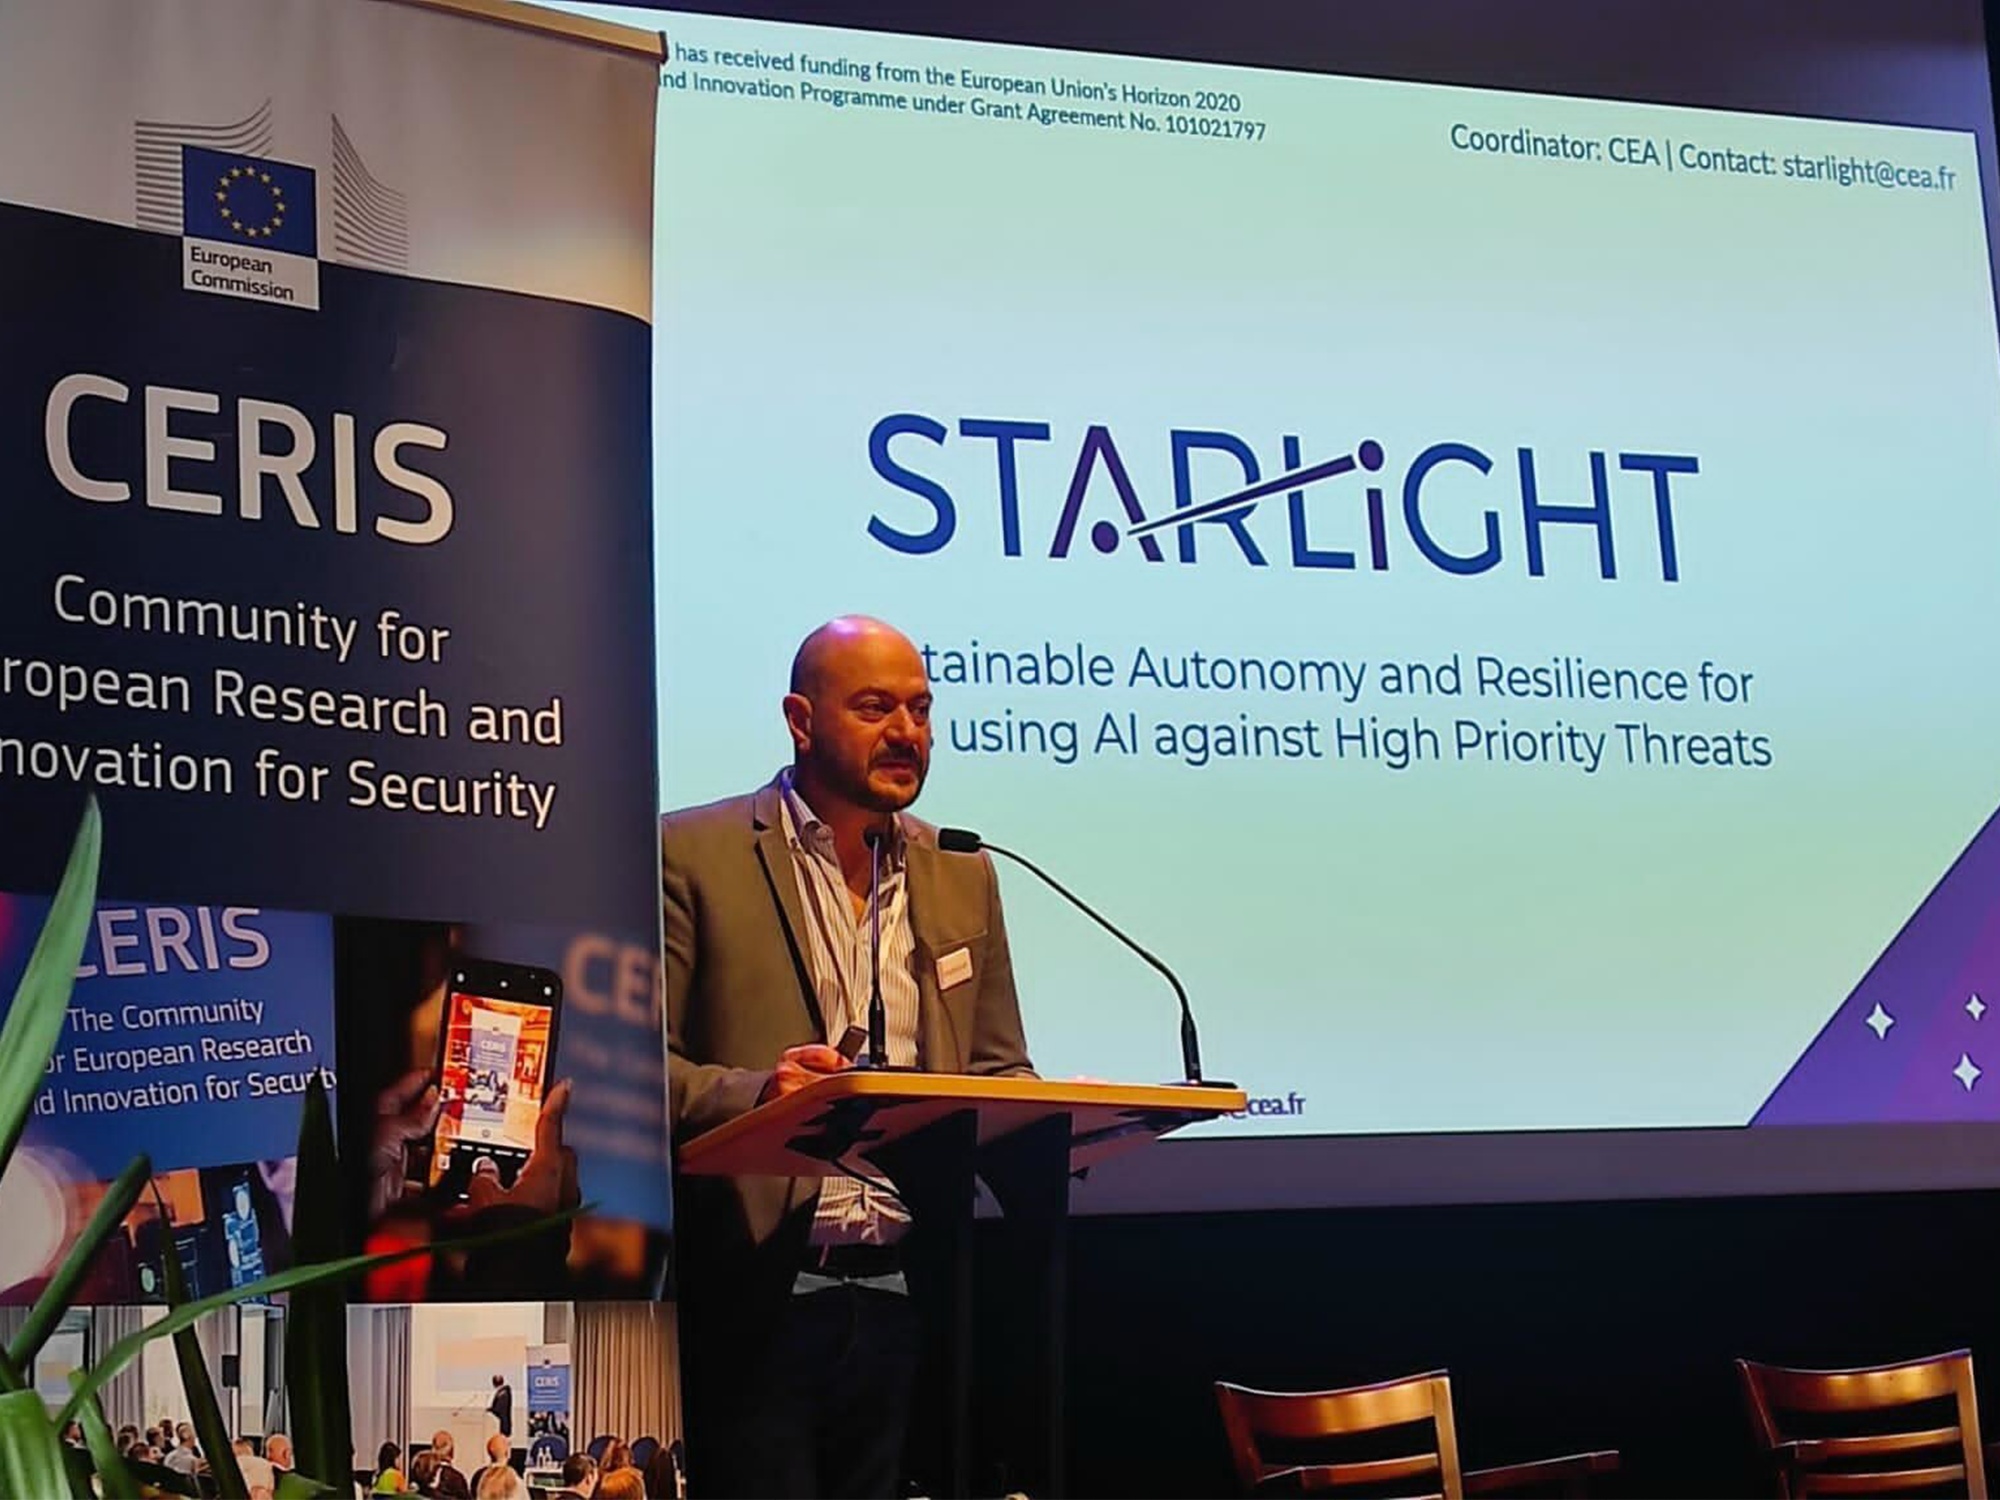 STARLIGHT at the CERIS Event on Foresight and Key Enabling Technologies